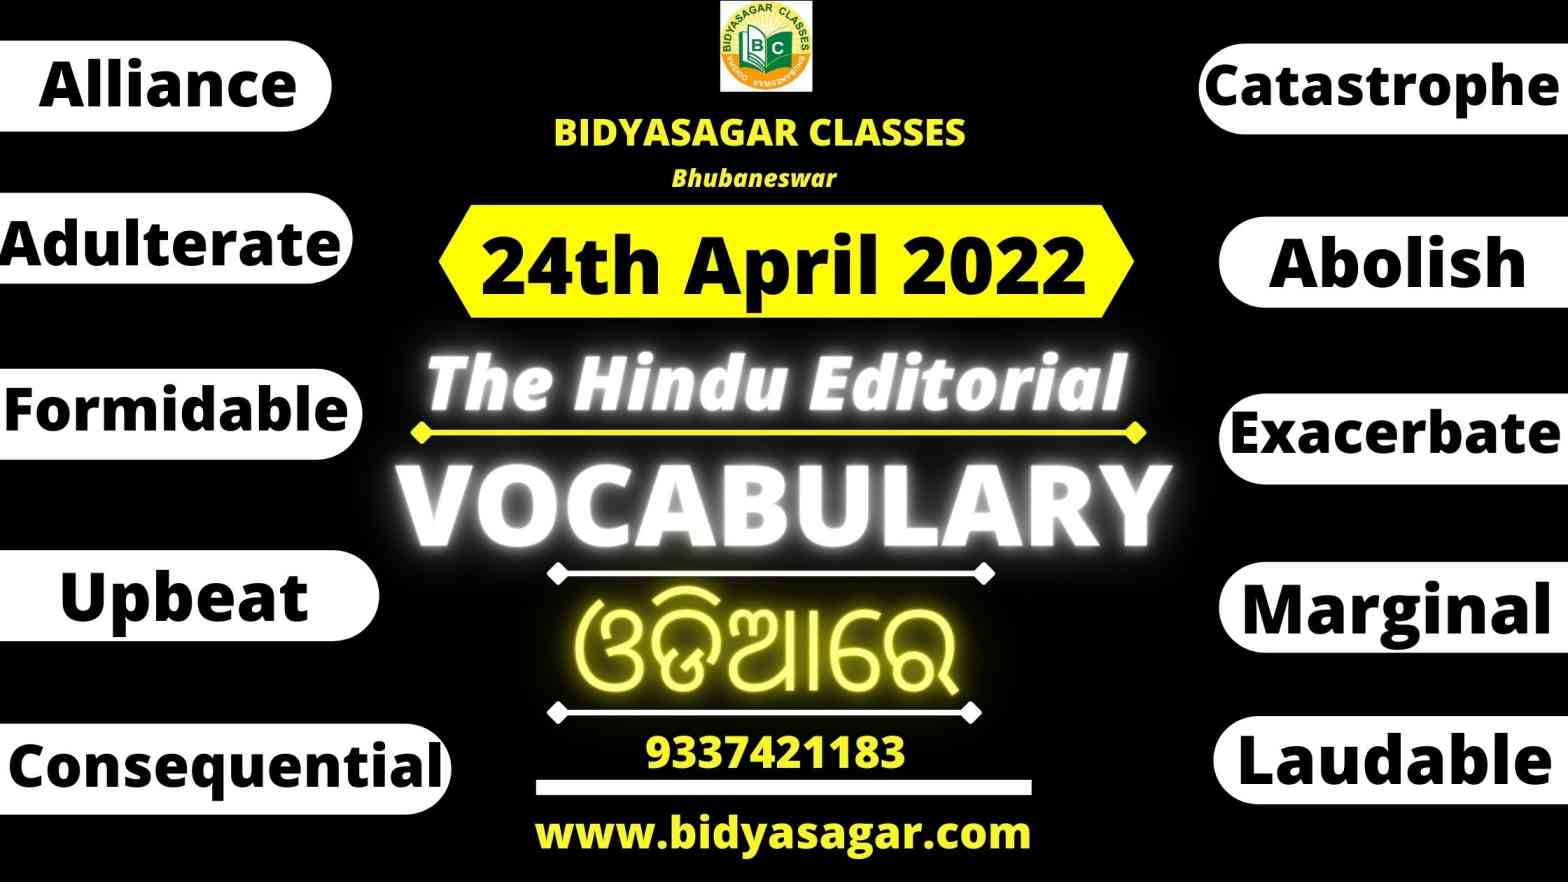 The Hindu Editorial Vocabulary of 24th April 2022